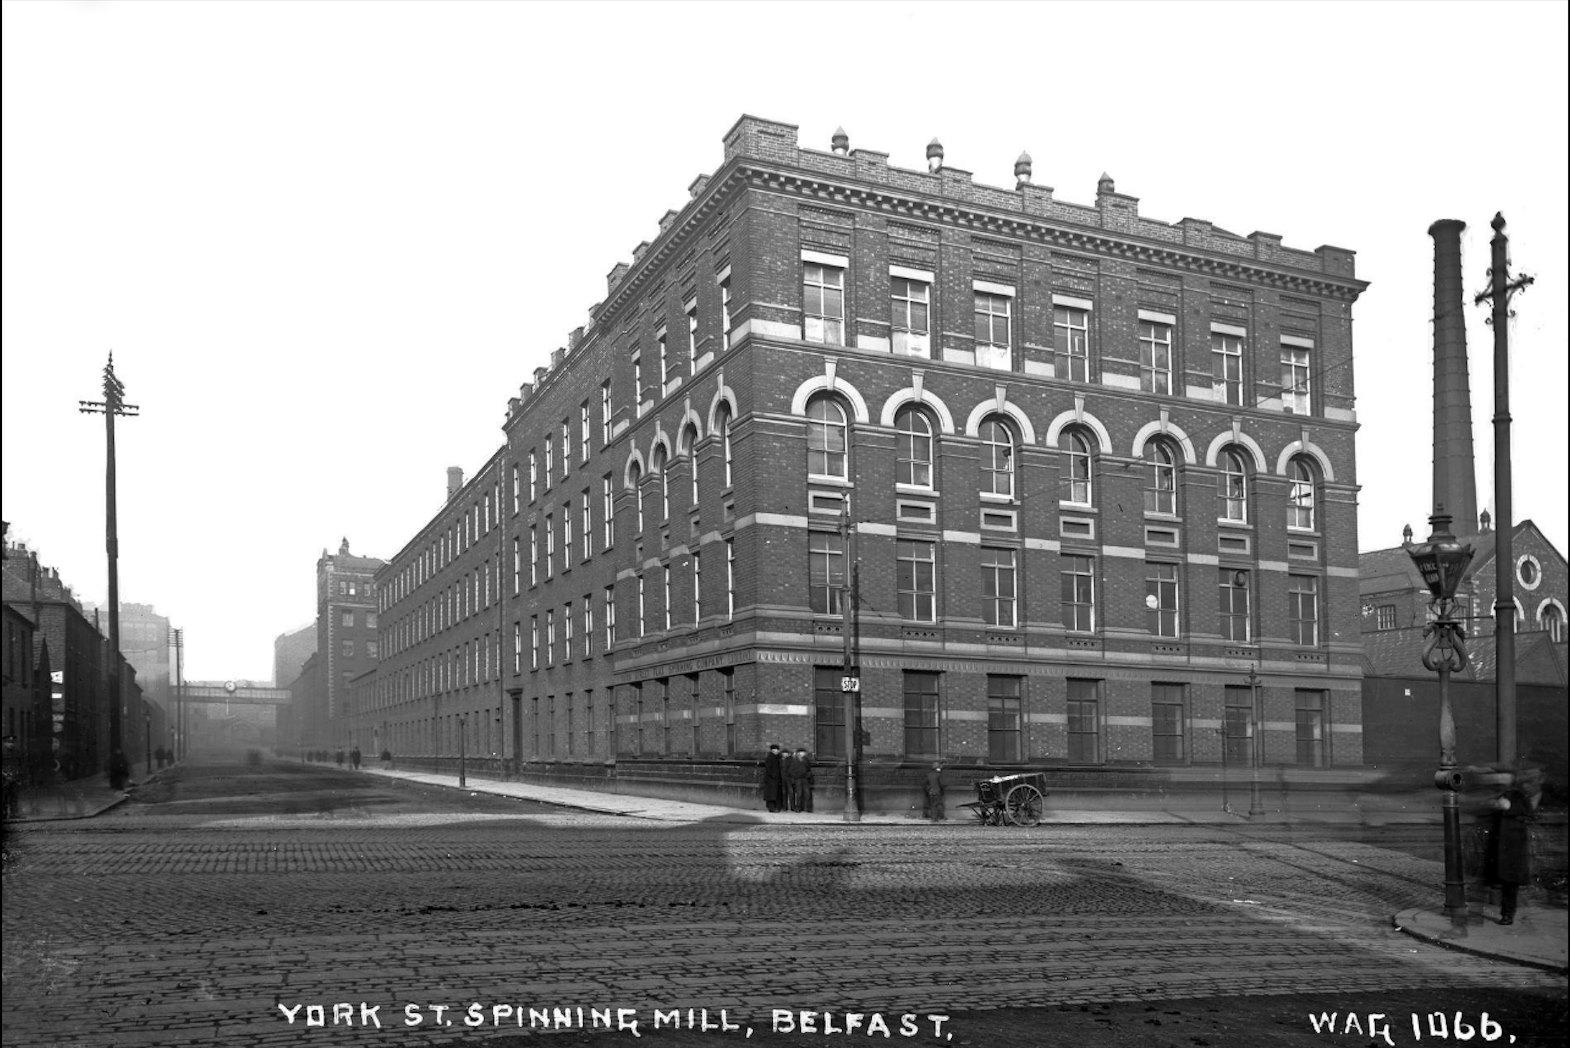 A photograph of ca. 1900 showing the York Street Spinning Mill in Belfast, an imposing brick industrial building of four stories with chimneys and overpasses.